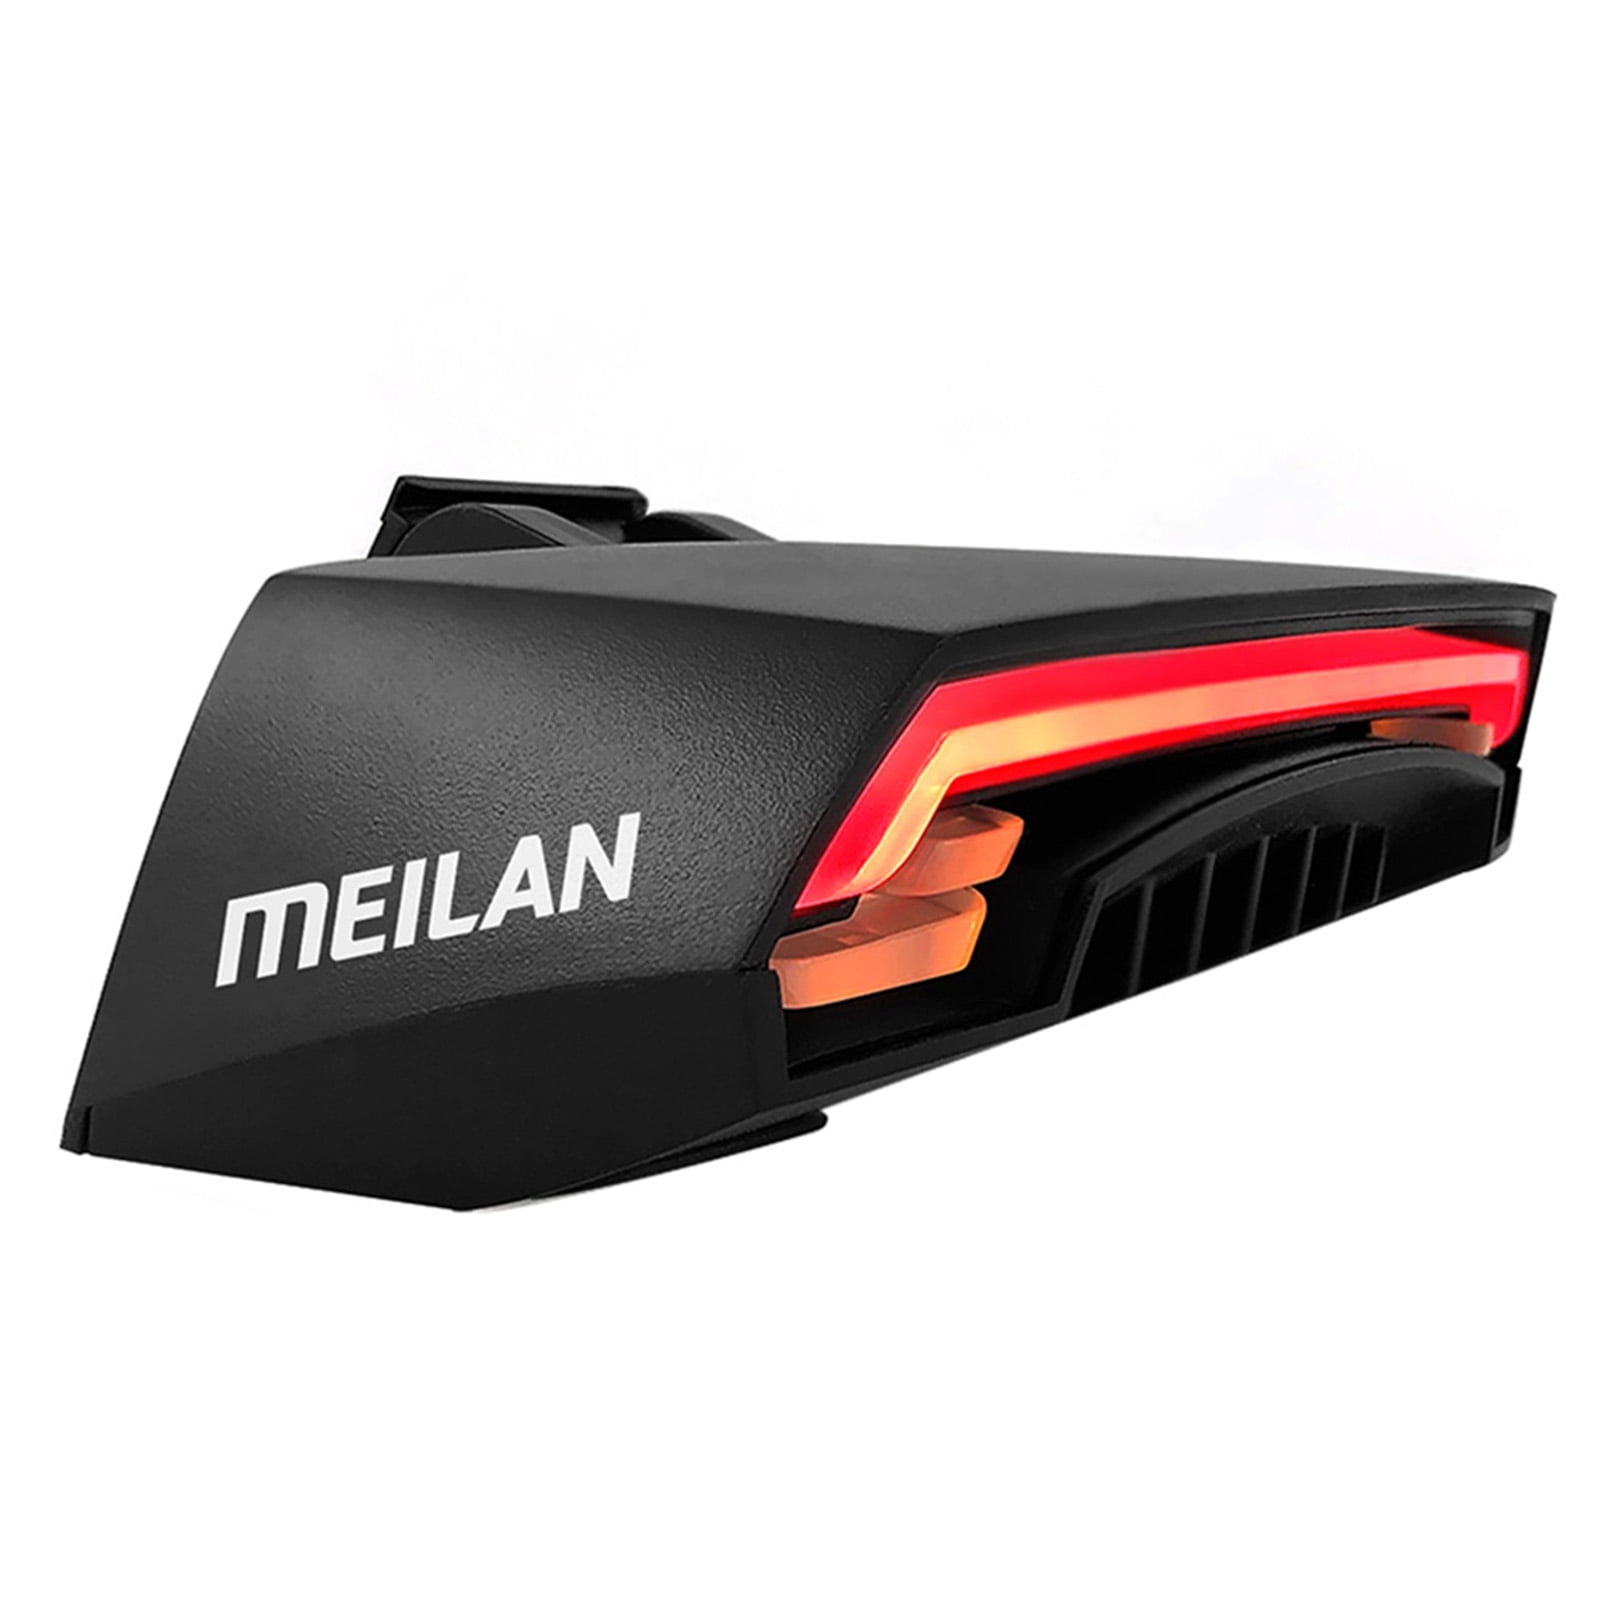 Set MEILAN Bike Light Kit Front and Black Smart Lights for Bike Headlight and Taillight Set,USB Rechargeable,Easy to Instal X1+X5 